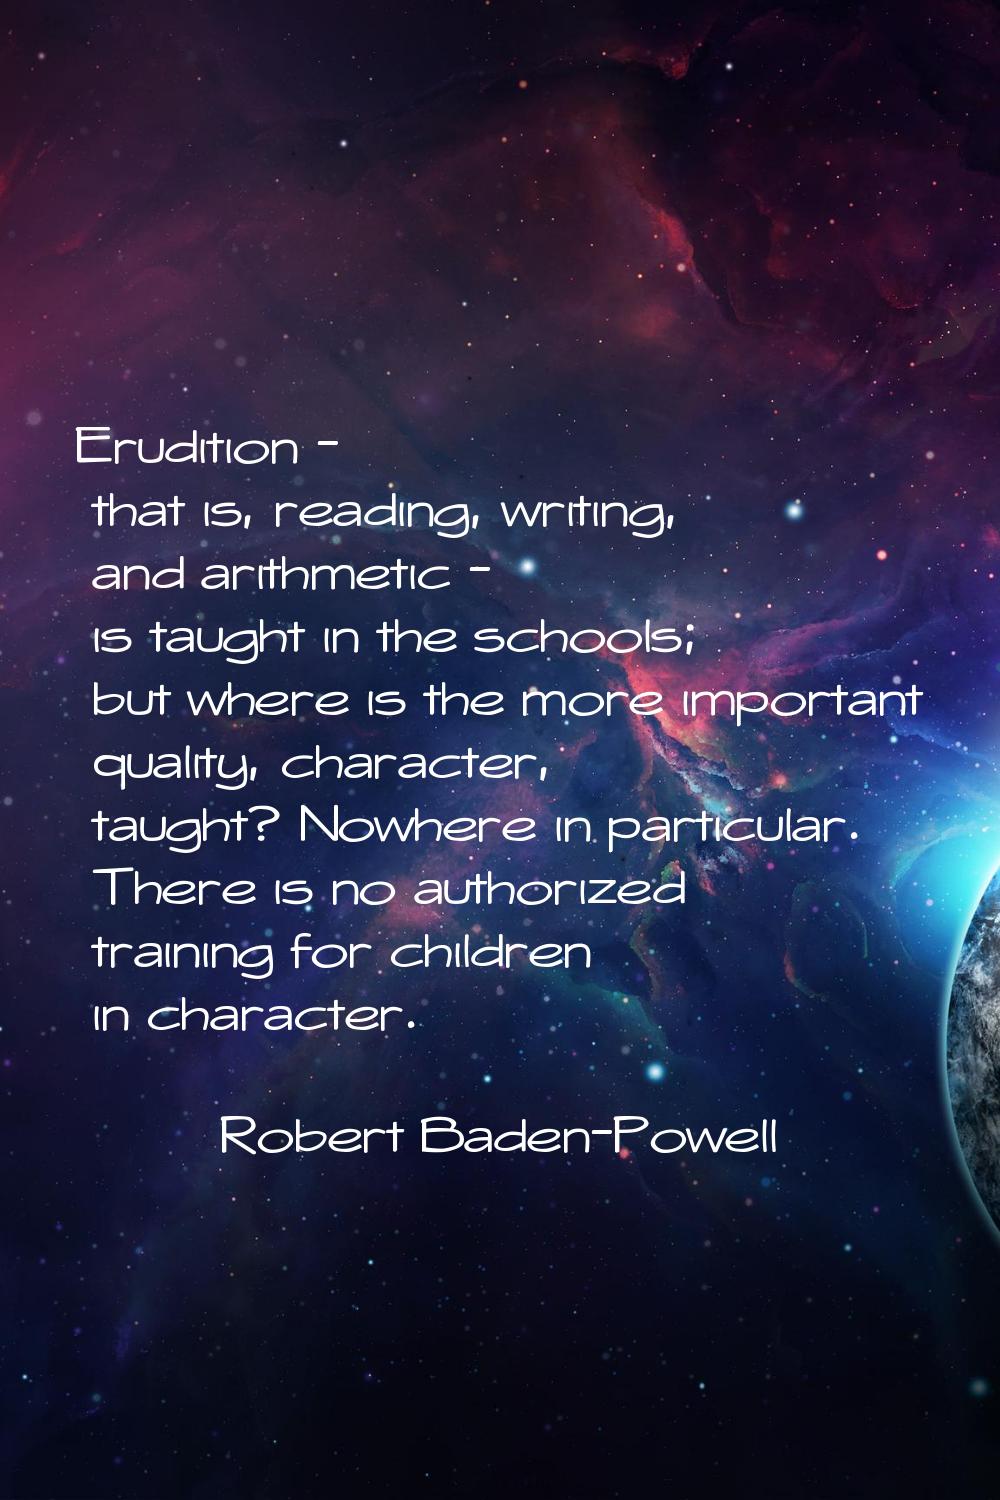 Erudition - that is, reading, writing, and arithmetic - is taught in the schools; but where is the 